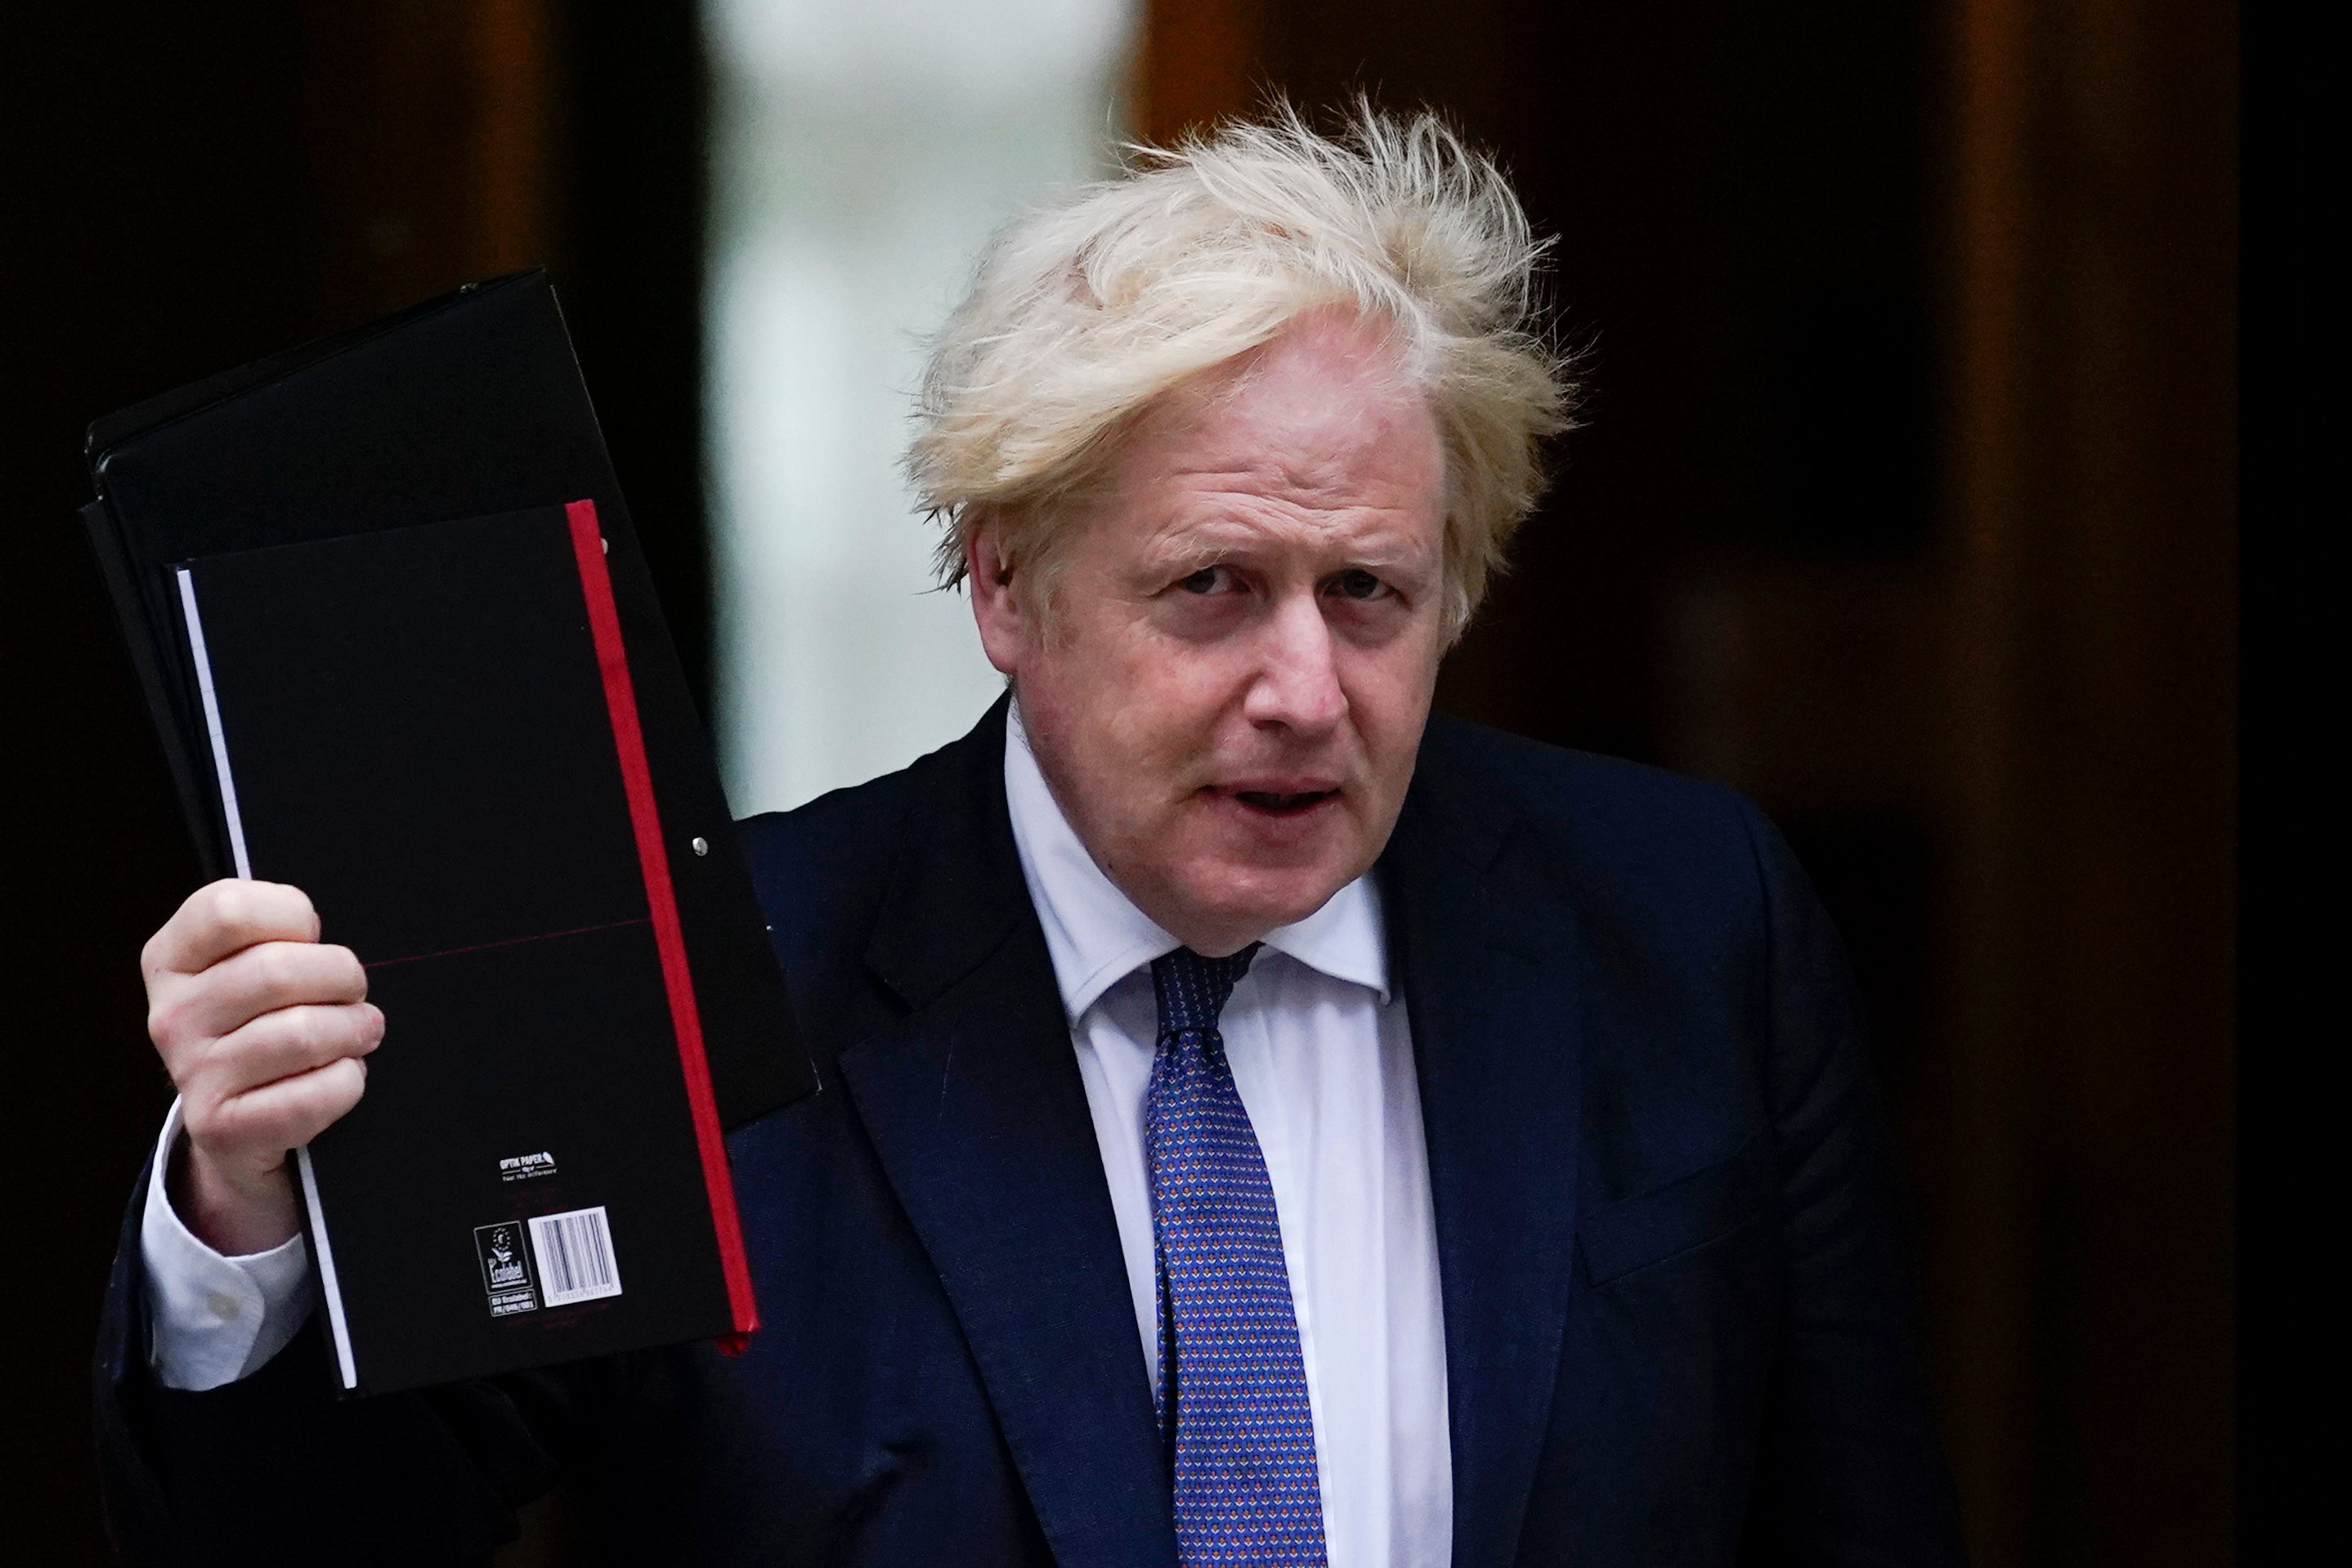 Boris Johnson has trumpeted the supposed benefits of Brexit for businesses